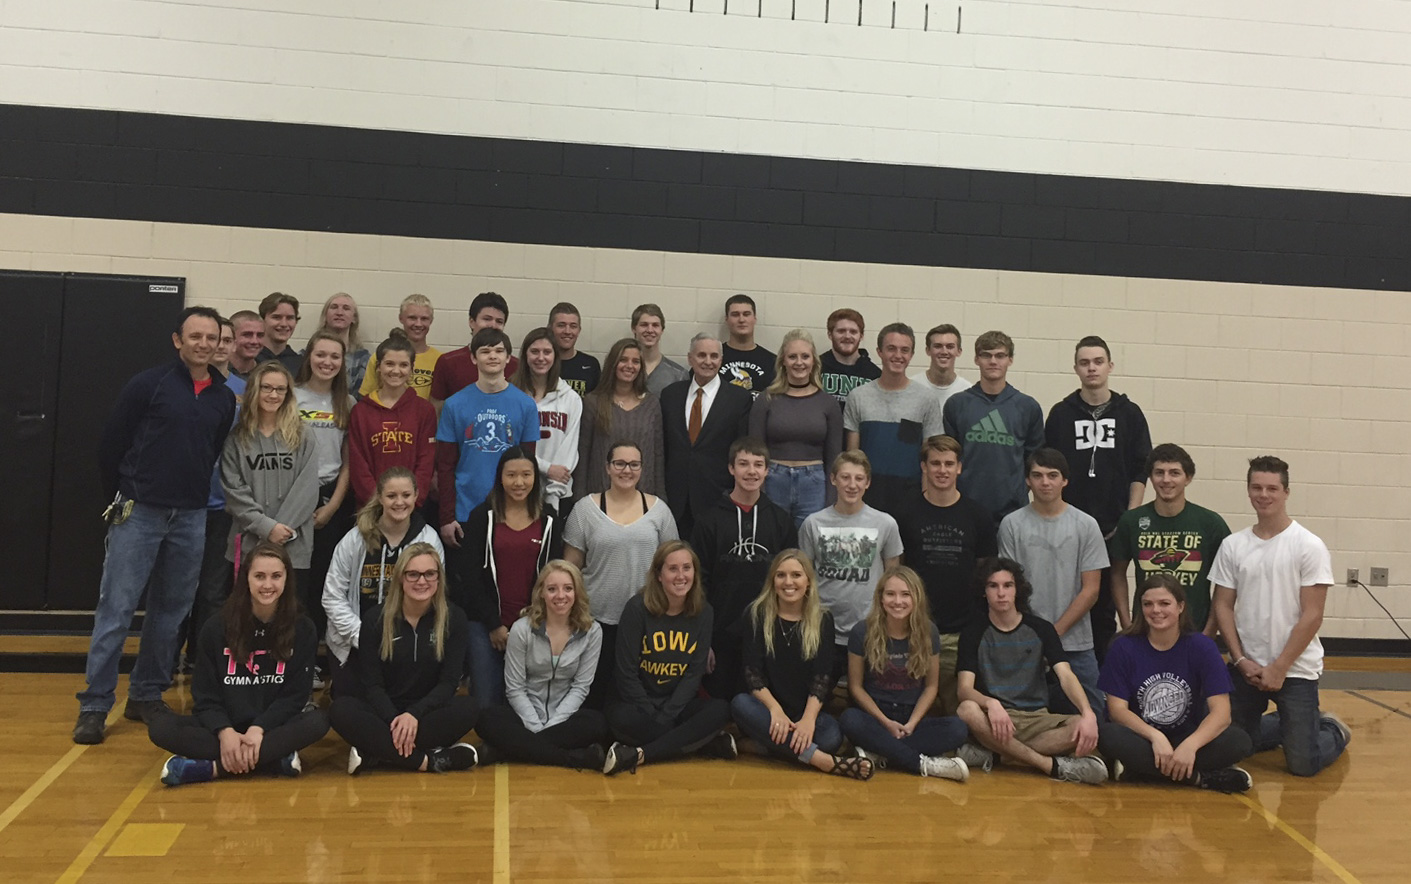 Governor Dayton and Andover High School students